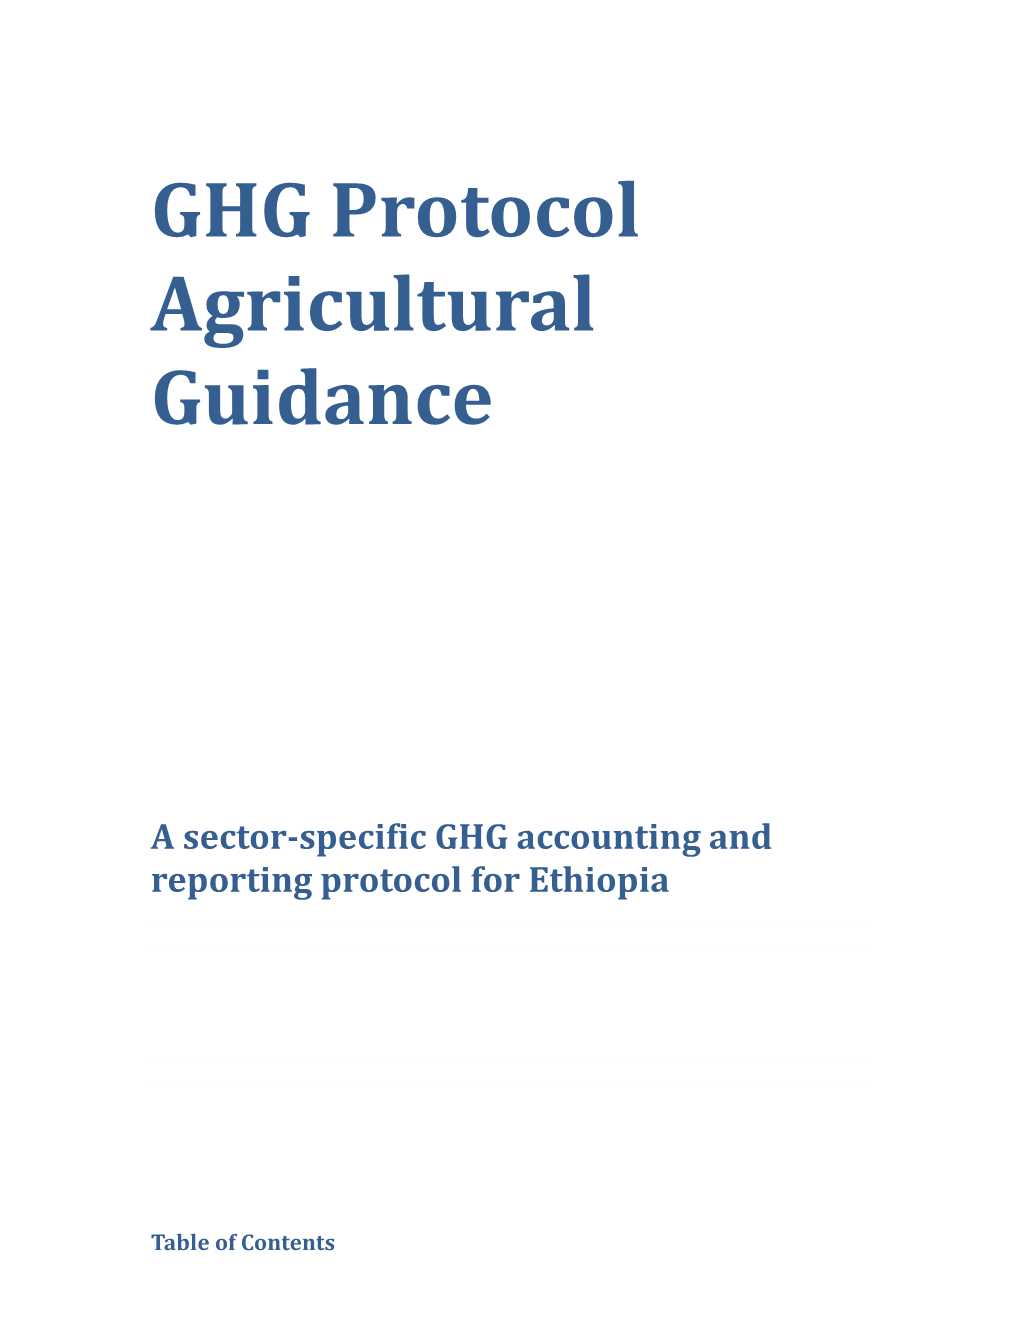 GHG Protocol Agricultural Guidance